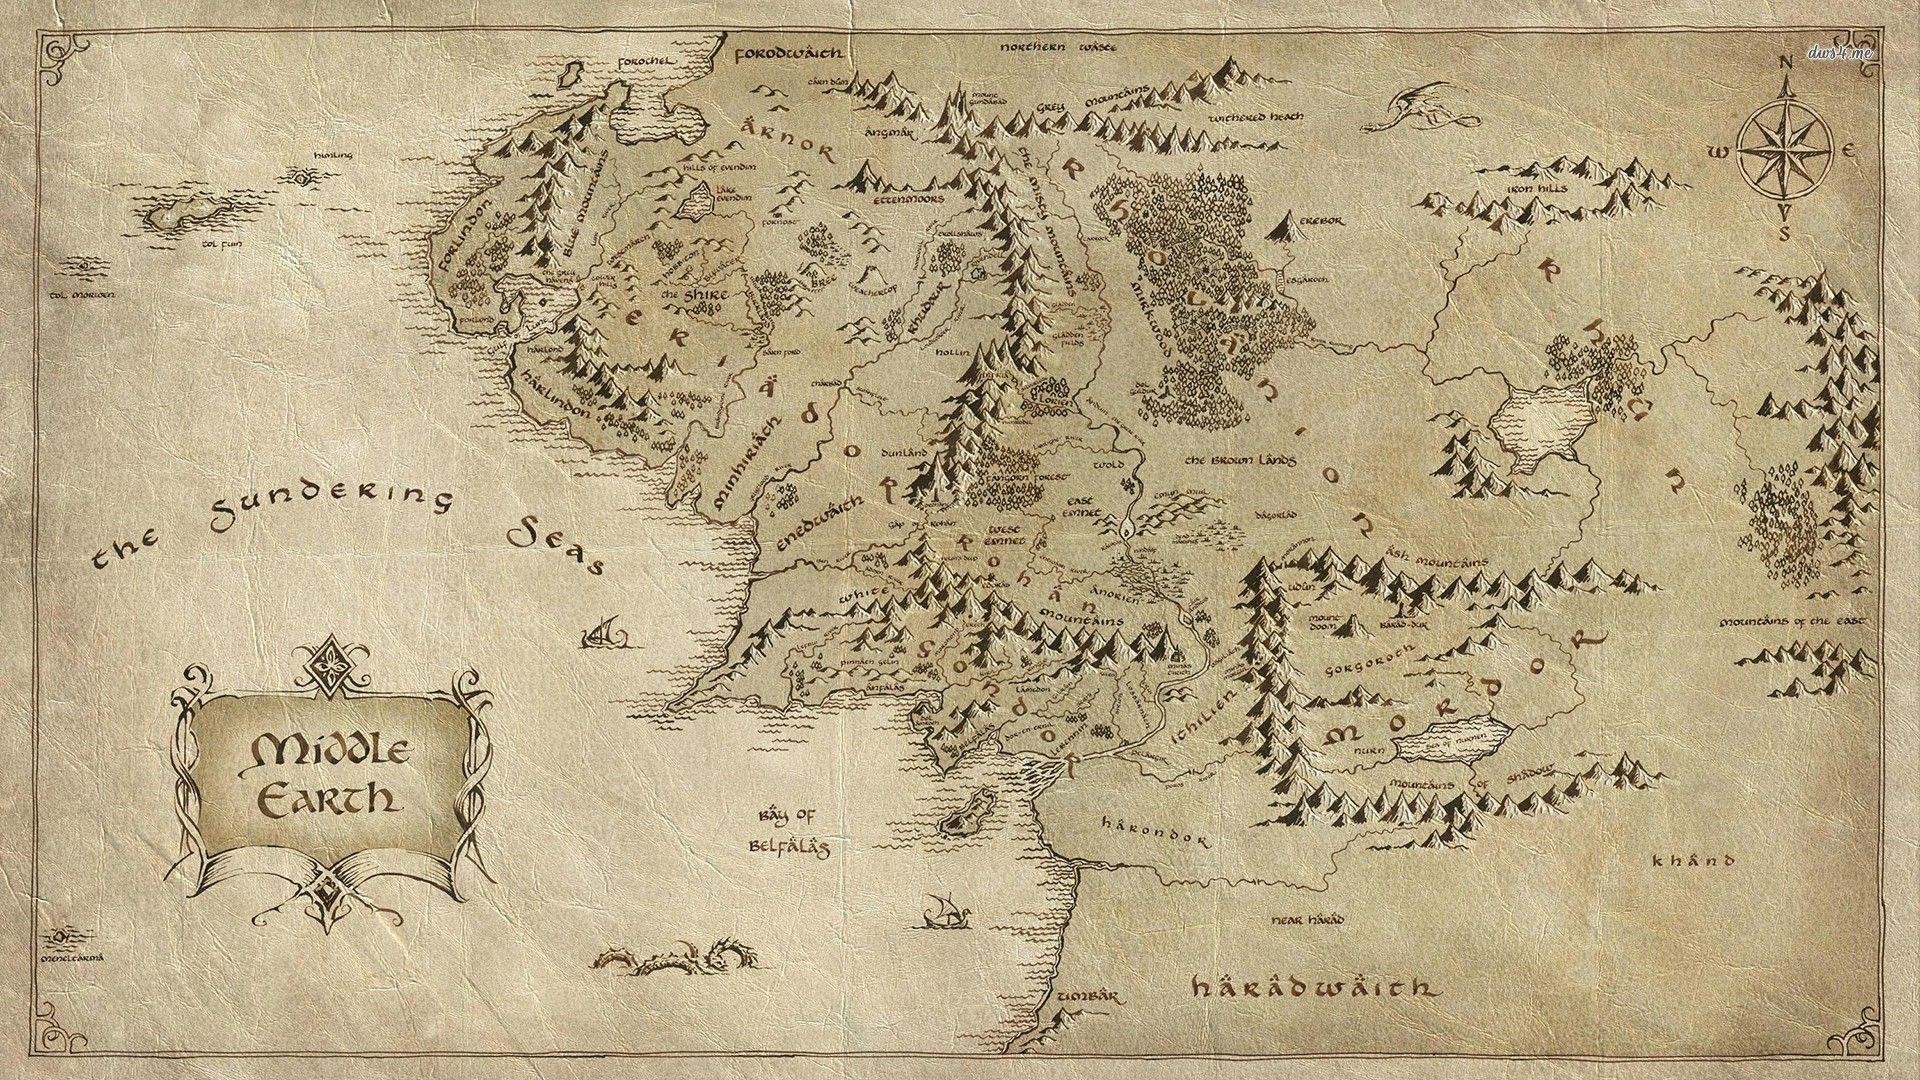 1920x1080 Middle Earth map - The Lord of The Rings wallpaper - Movie .